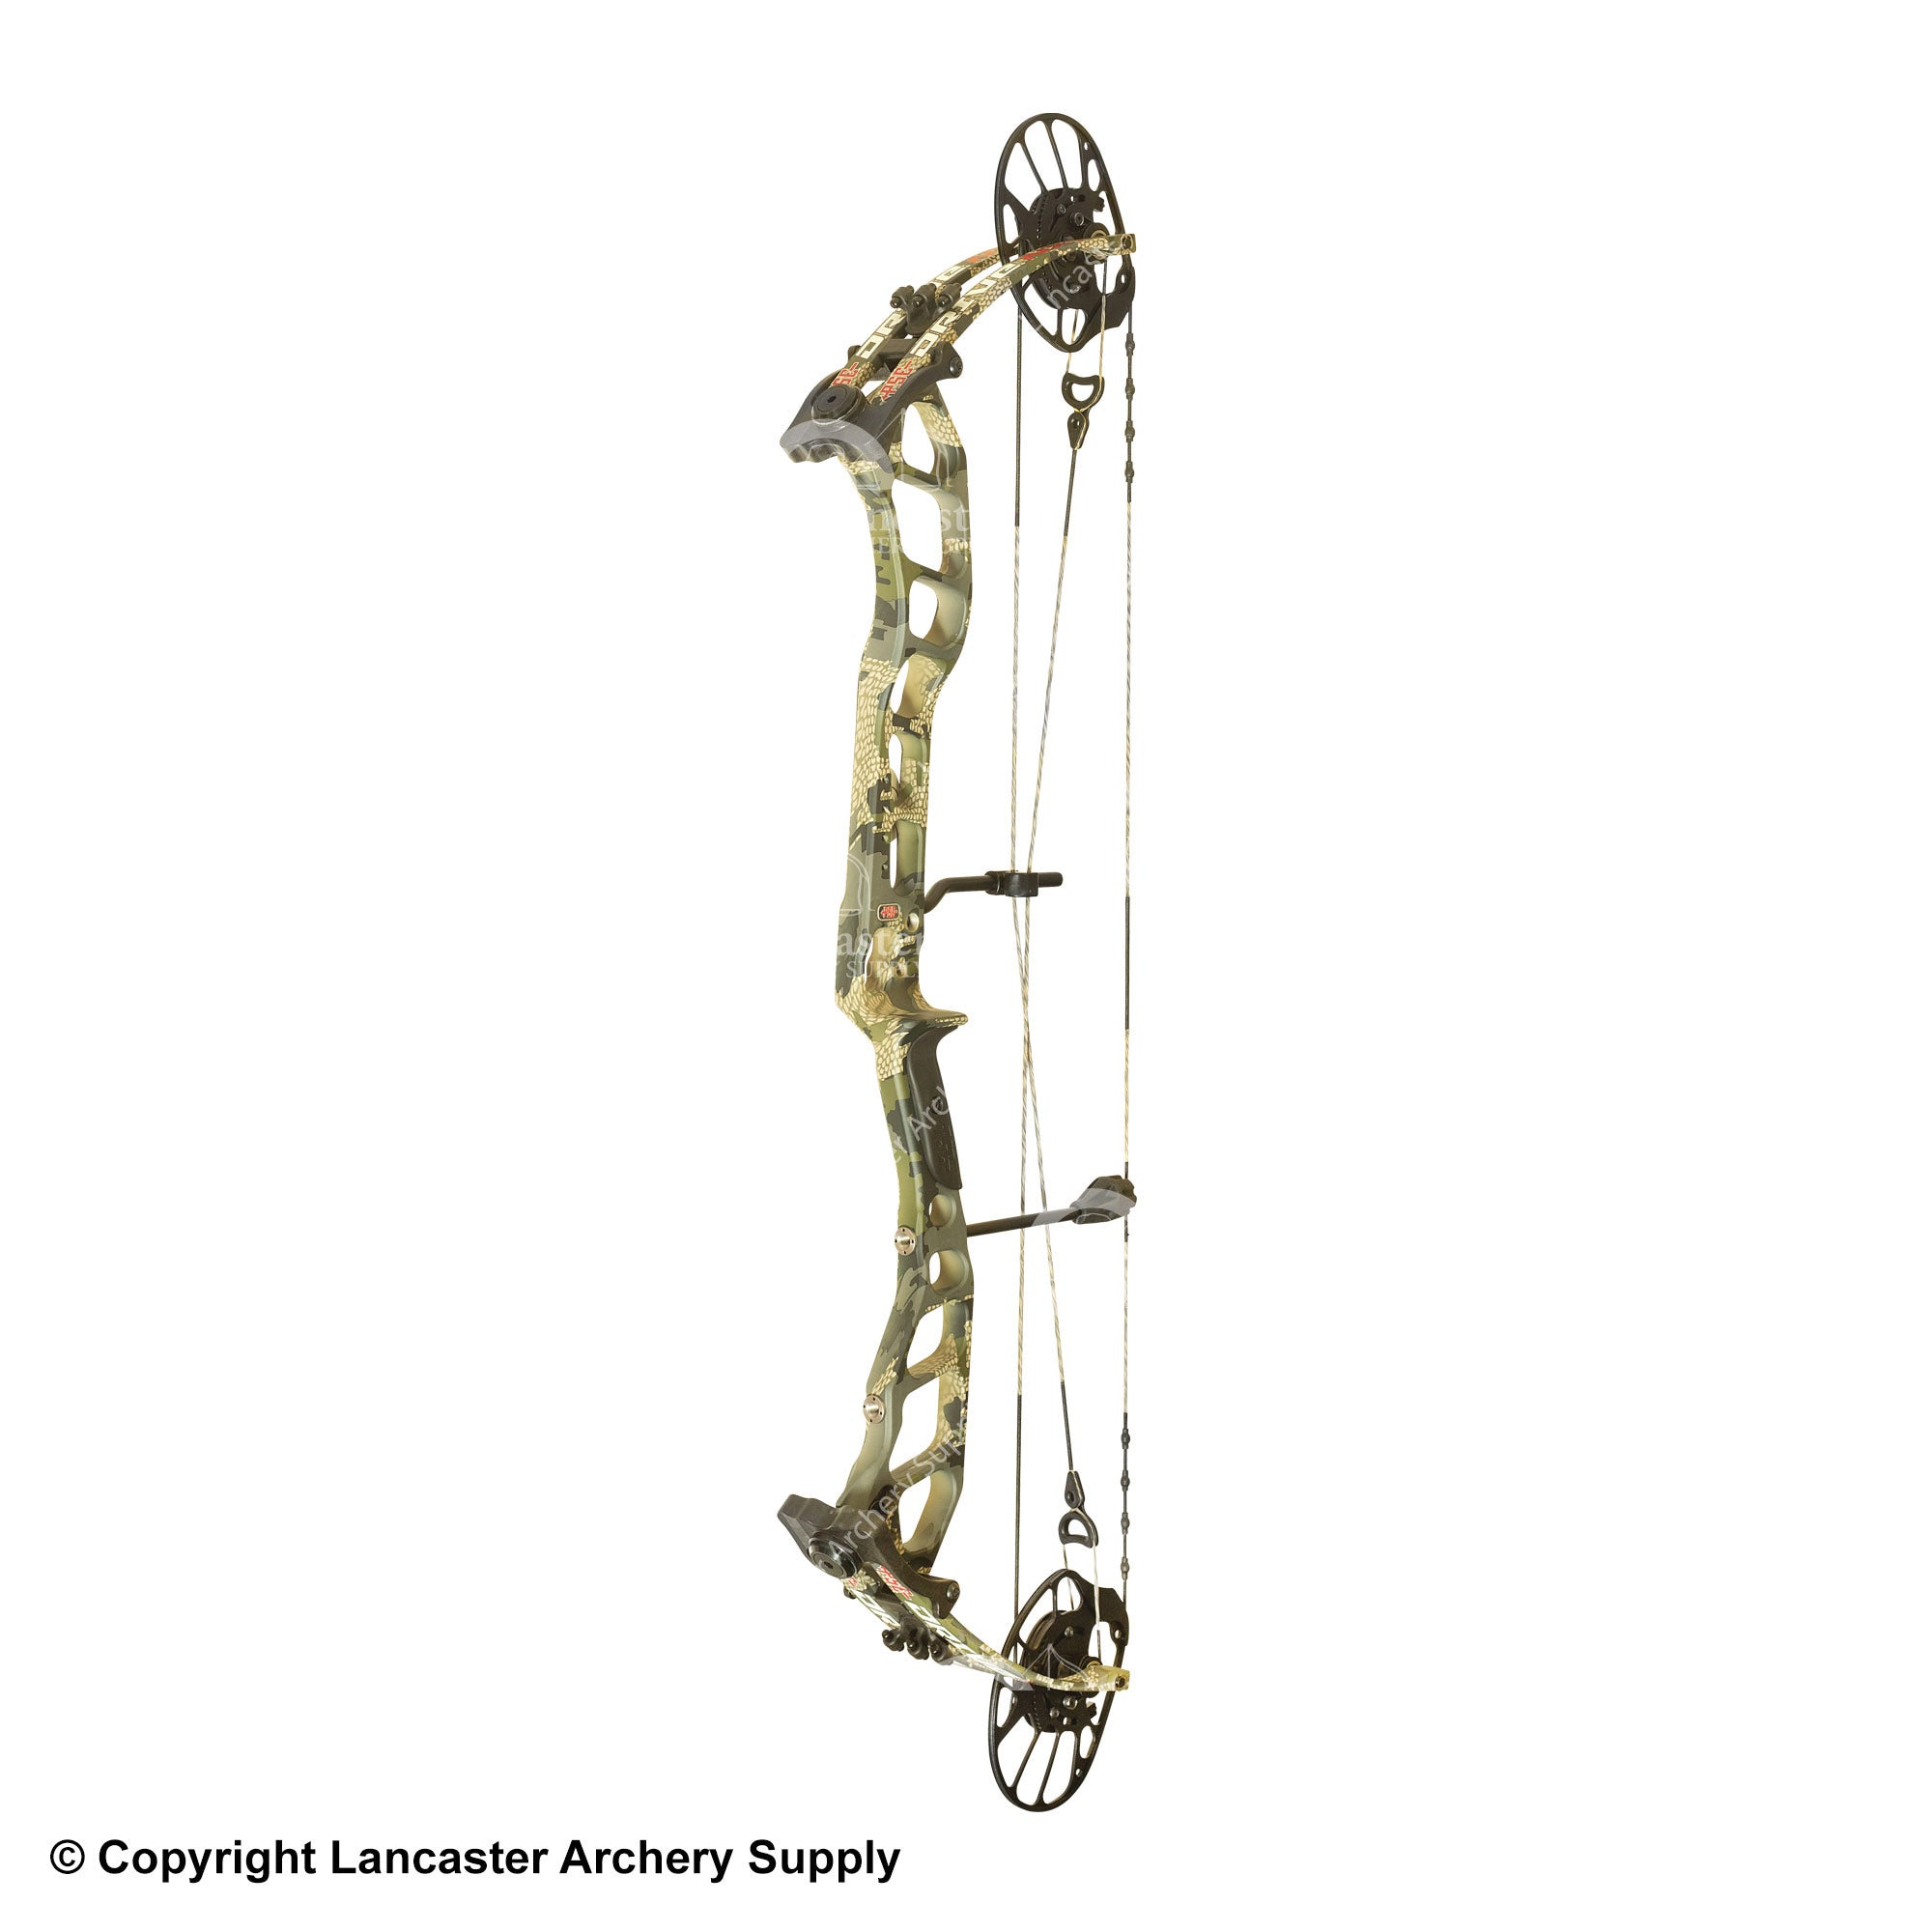 PSE Drive NXT Compound Hunting Bow